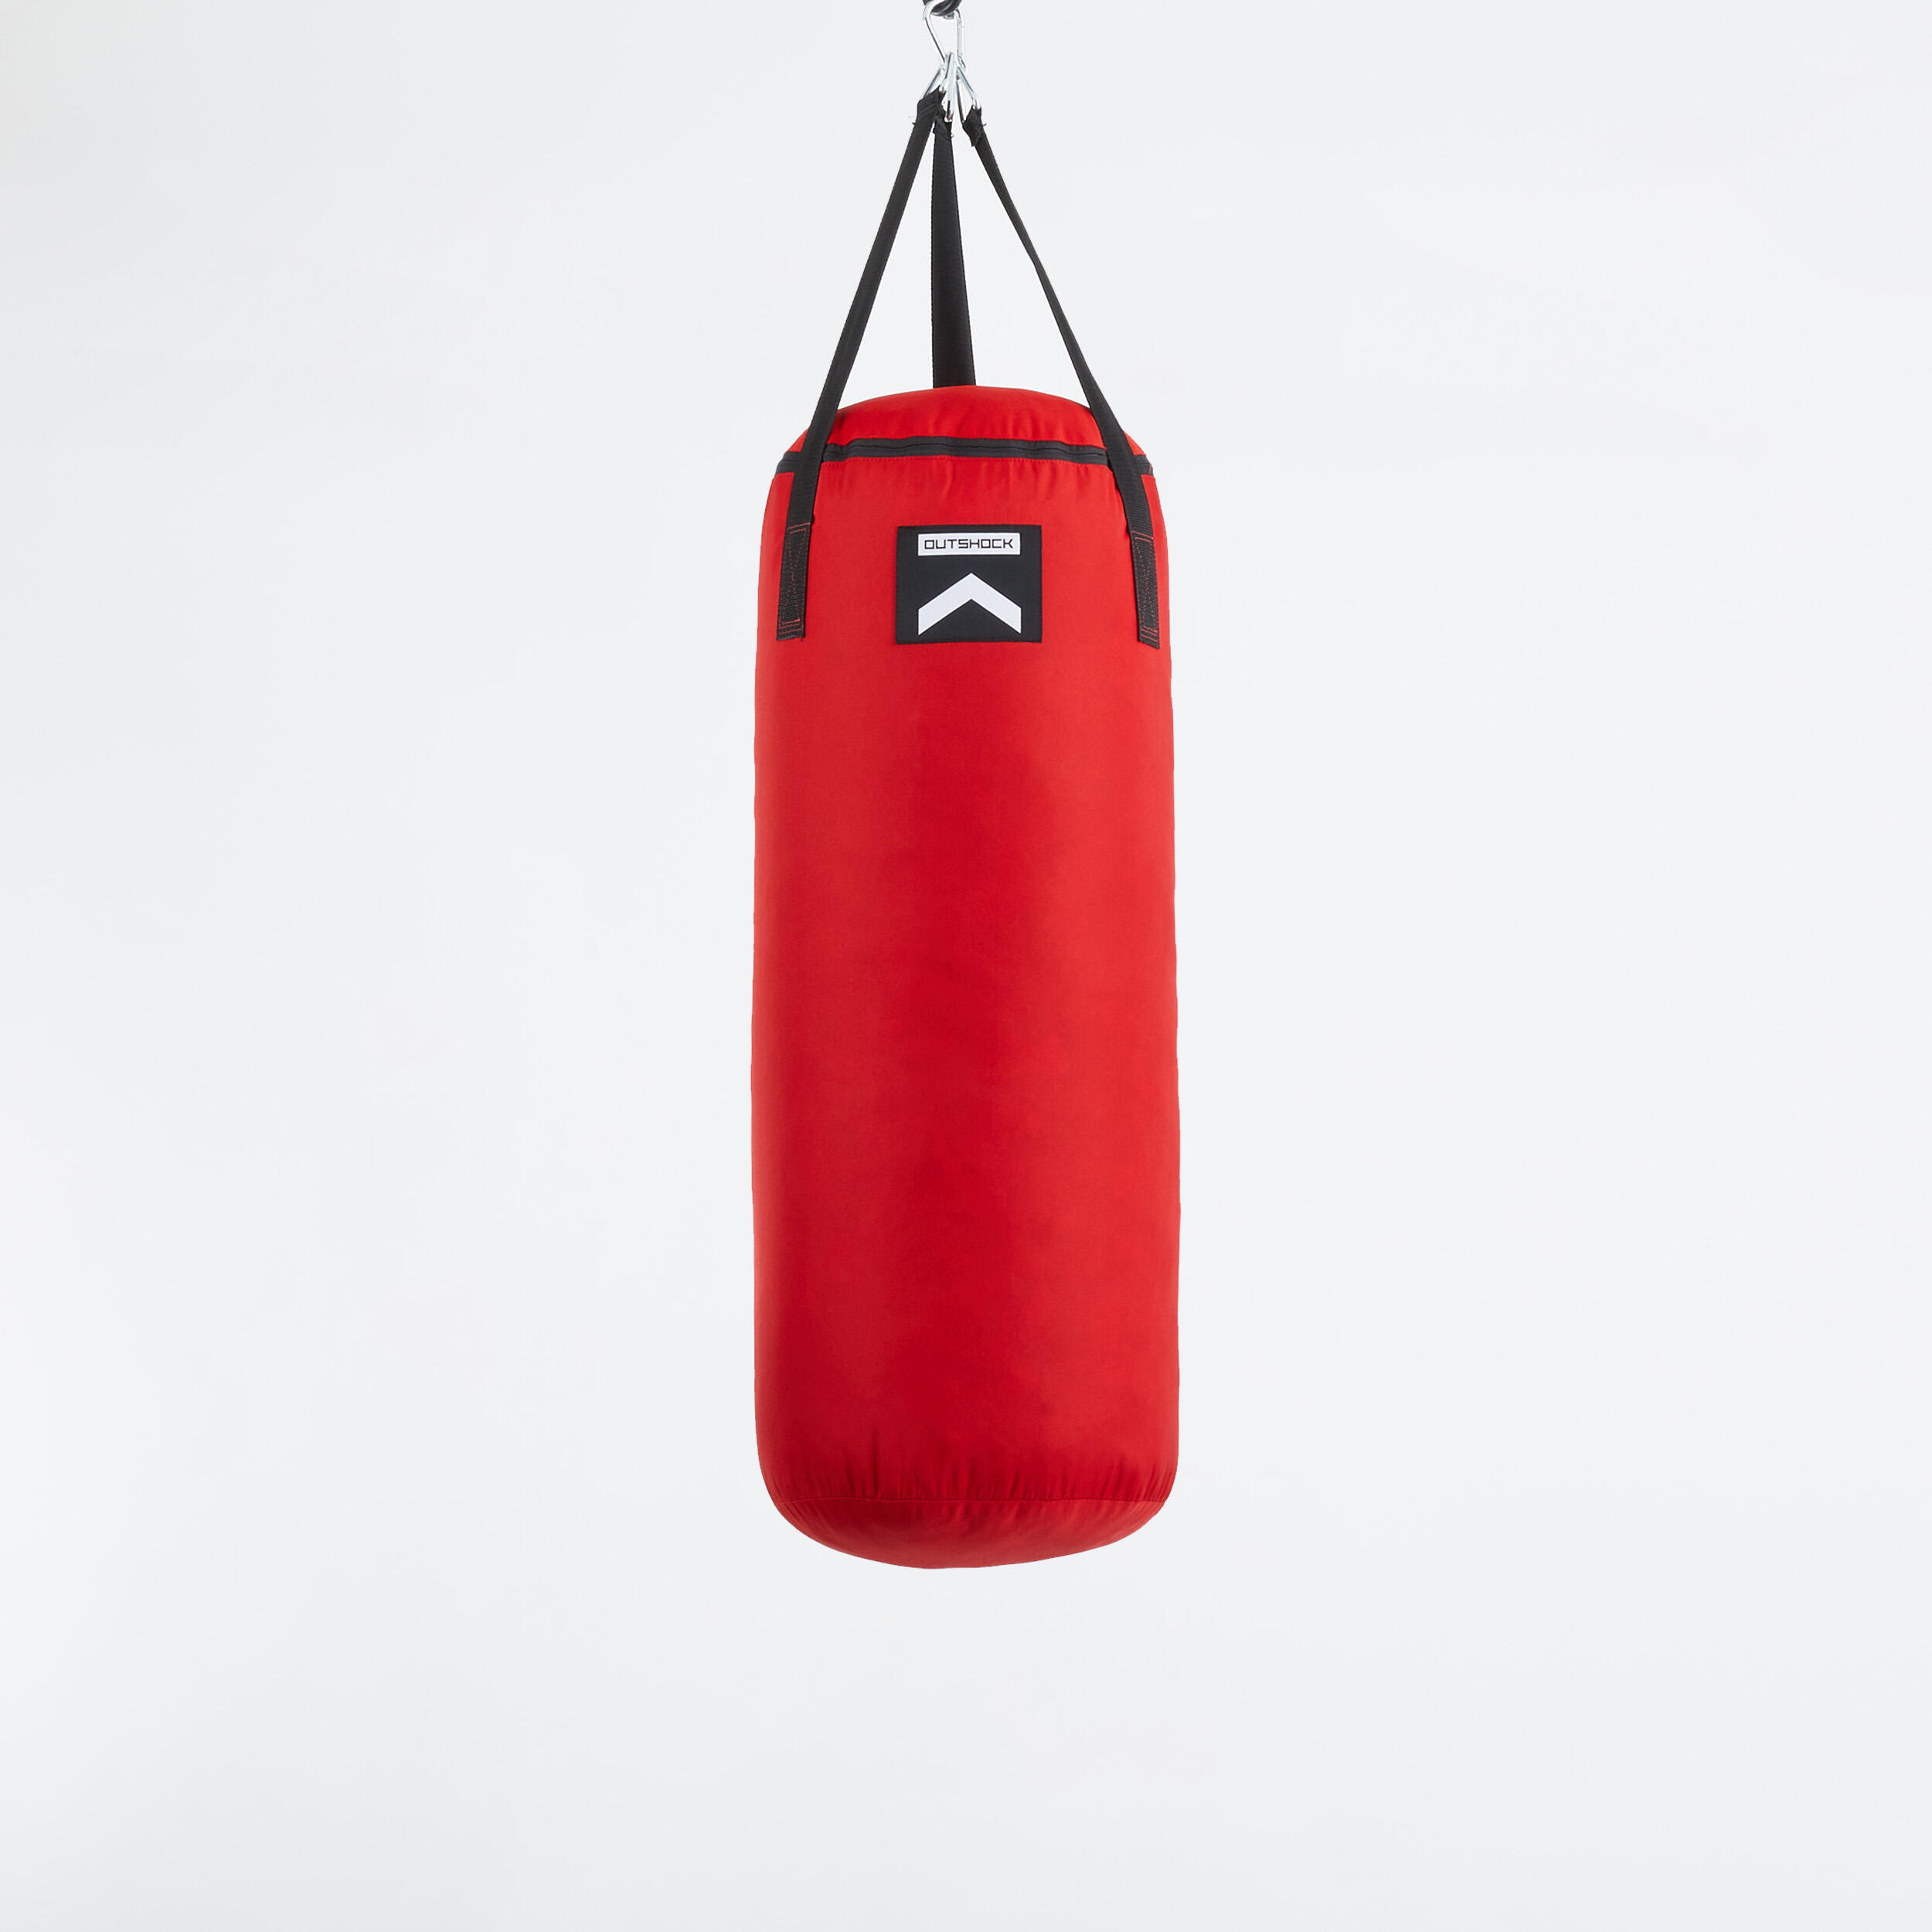 Buy Heavy Bag Boxing Set Punching Bags for Adults Heavy Duty Hanging Punching  Bag Unfilled Red Length 100cm Online at Low Prices in India  Amazonin